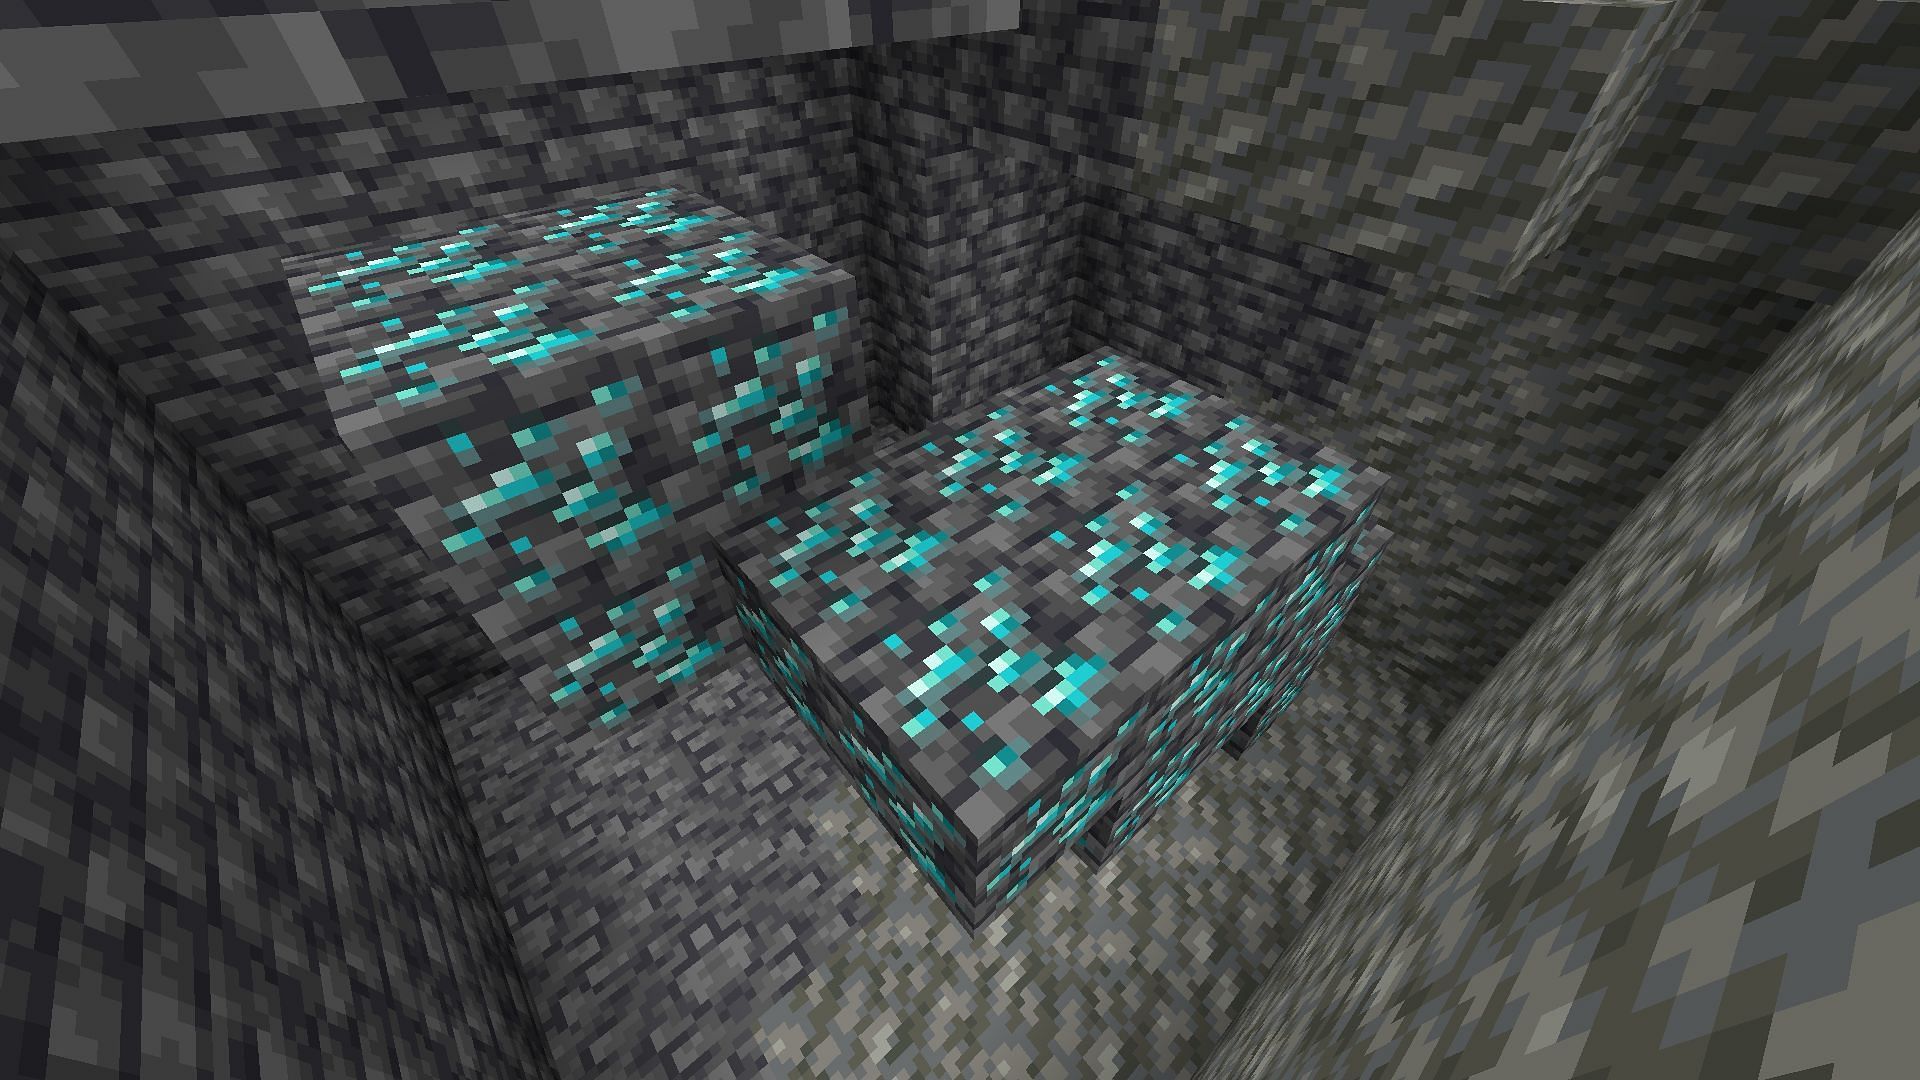 Minecraft fans can get at least 20 diamonds minimum from this seed&rsquo;s ore vein (Image via Mariobst_/Reddit)